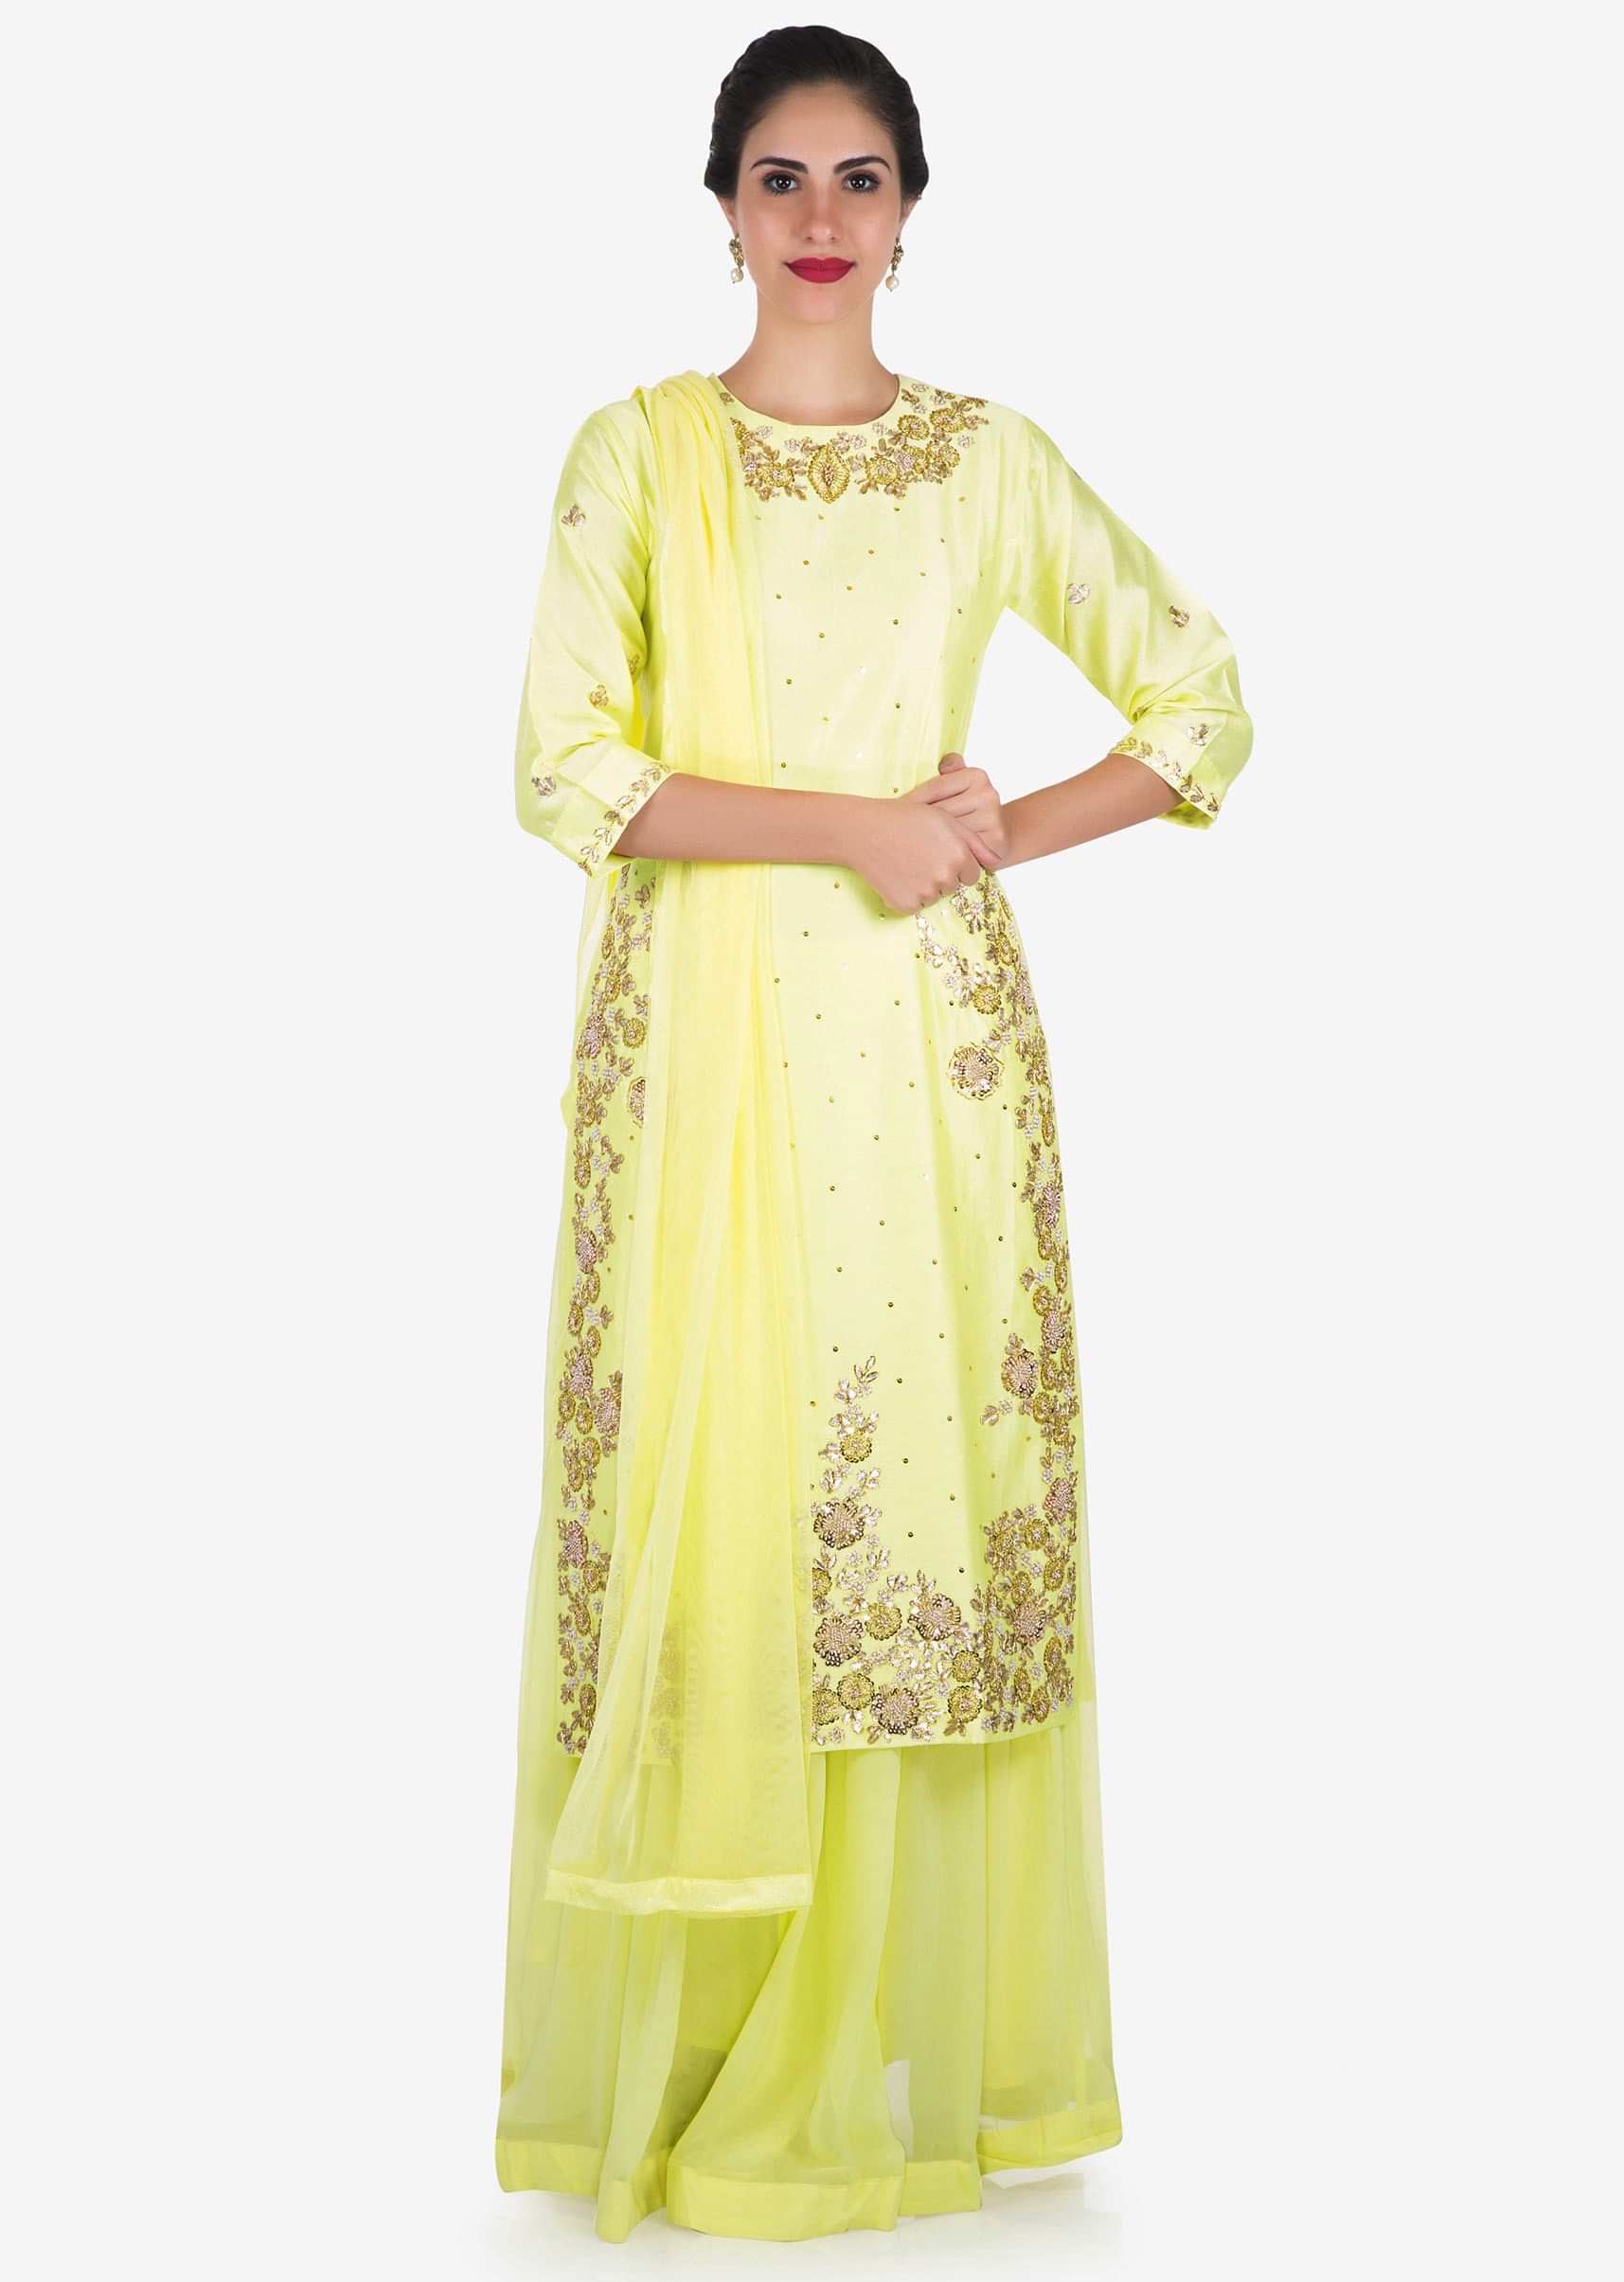 Lemon yellow palazzo suit embellished in gota patti and thread embroidery work